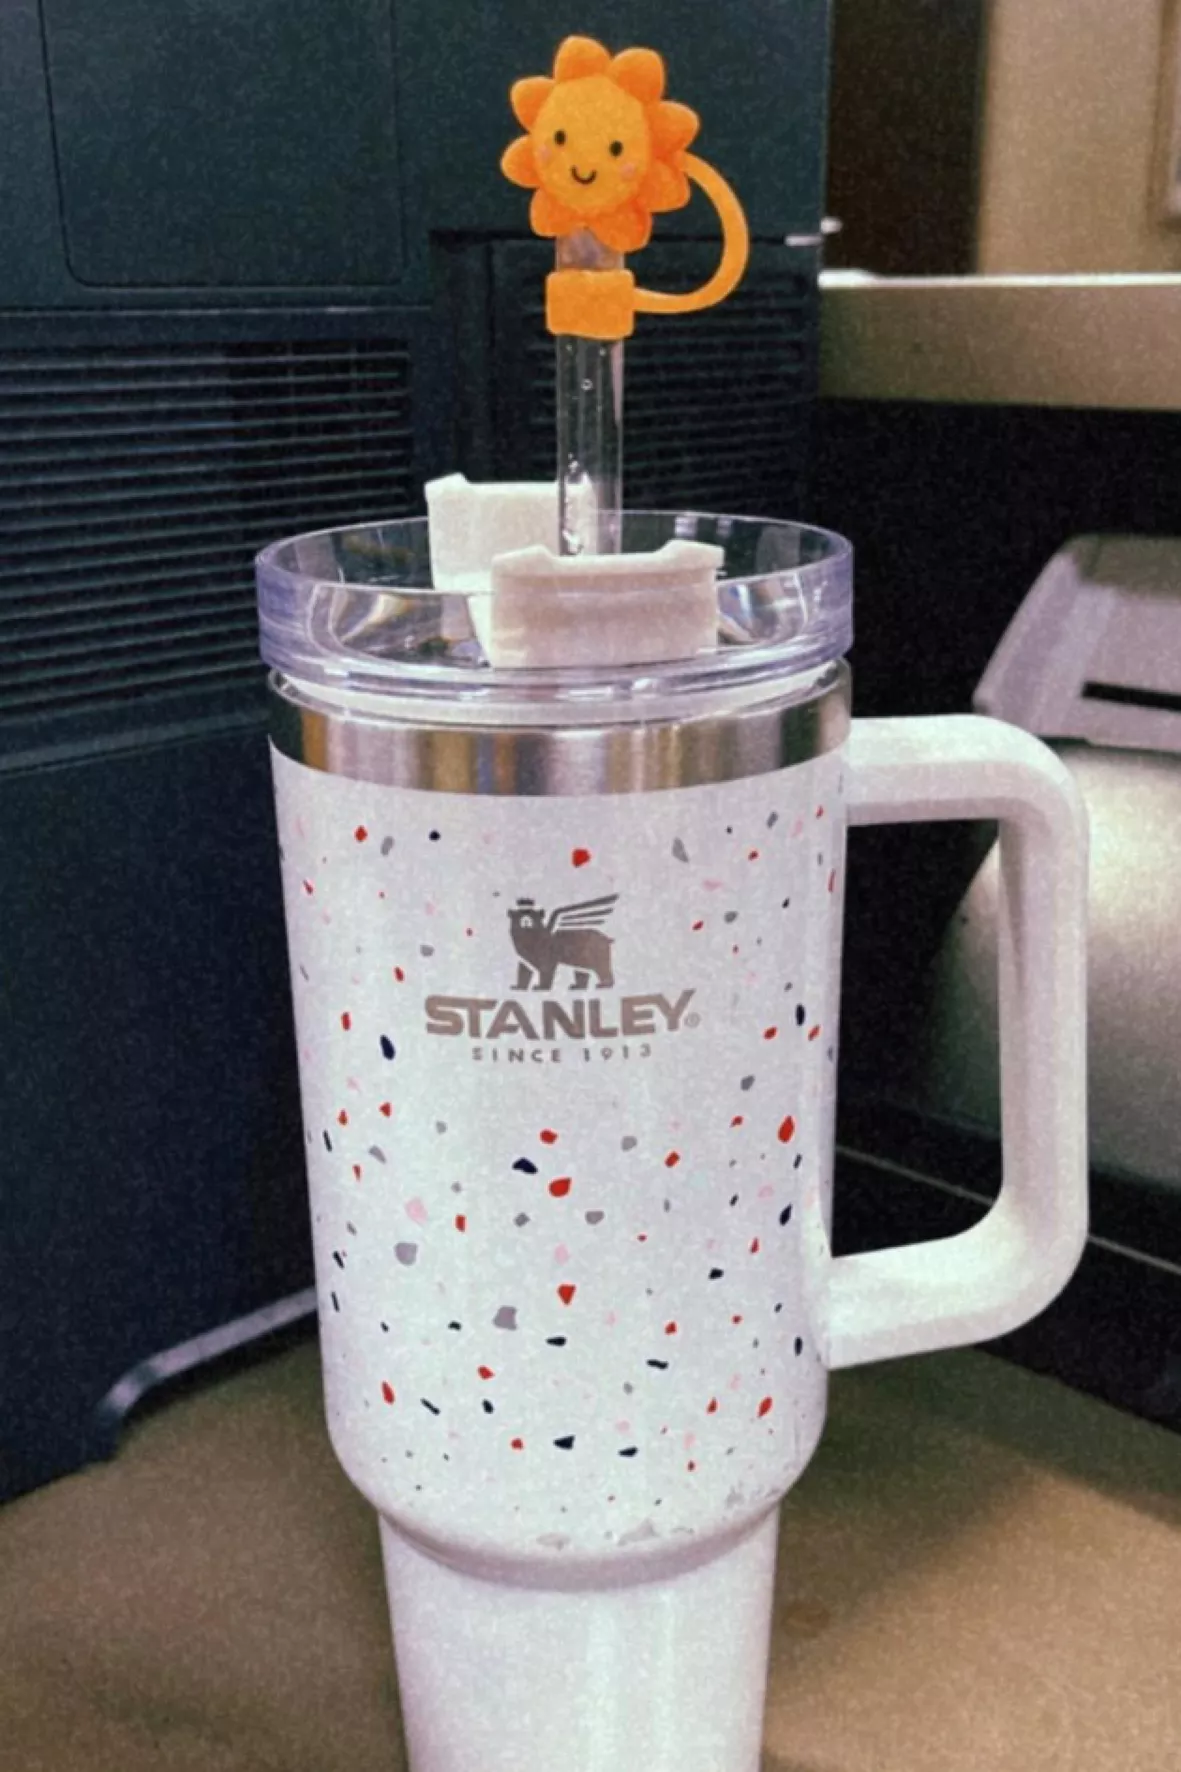 Okay I FINALLY found Stanley size straw toppers AND THEY ARE SO CUTE!!